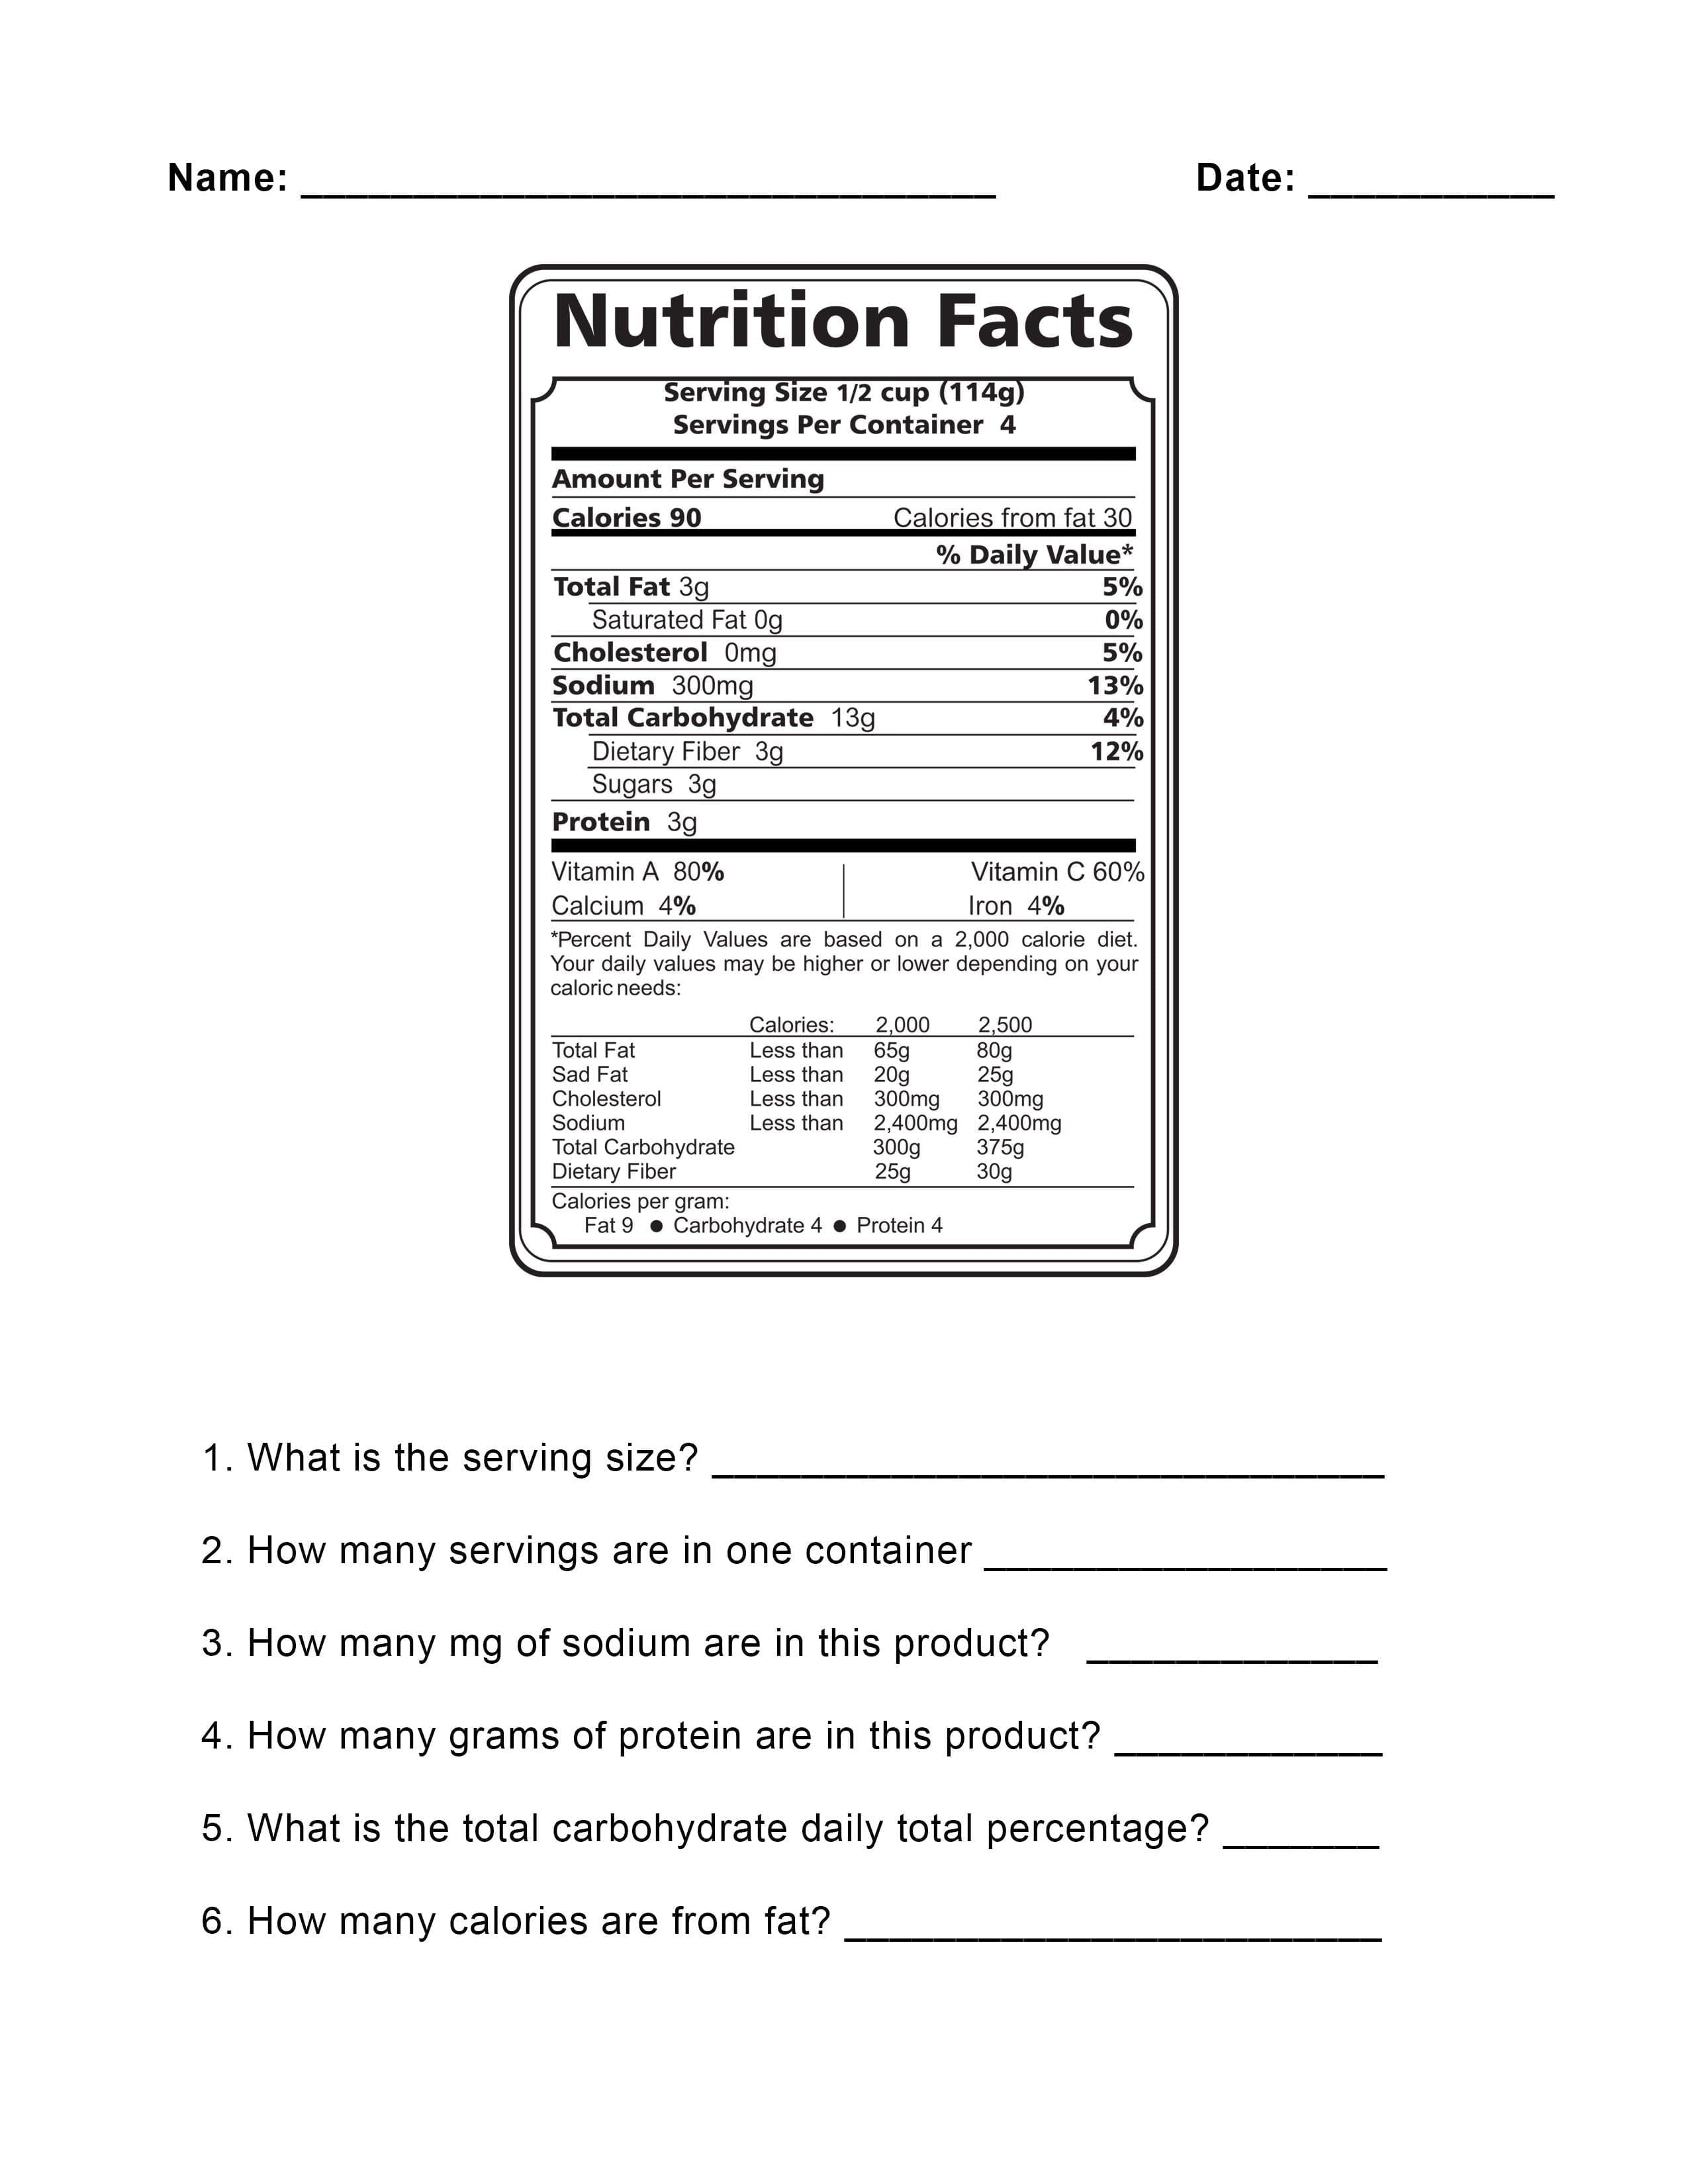 Blank Nutrition Label Worksheet  Writings And Essays Corner As Well As Nutrition Label Worksheet